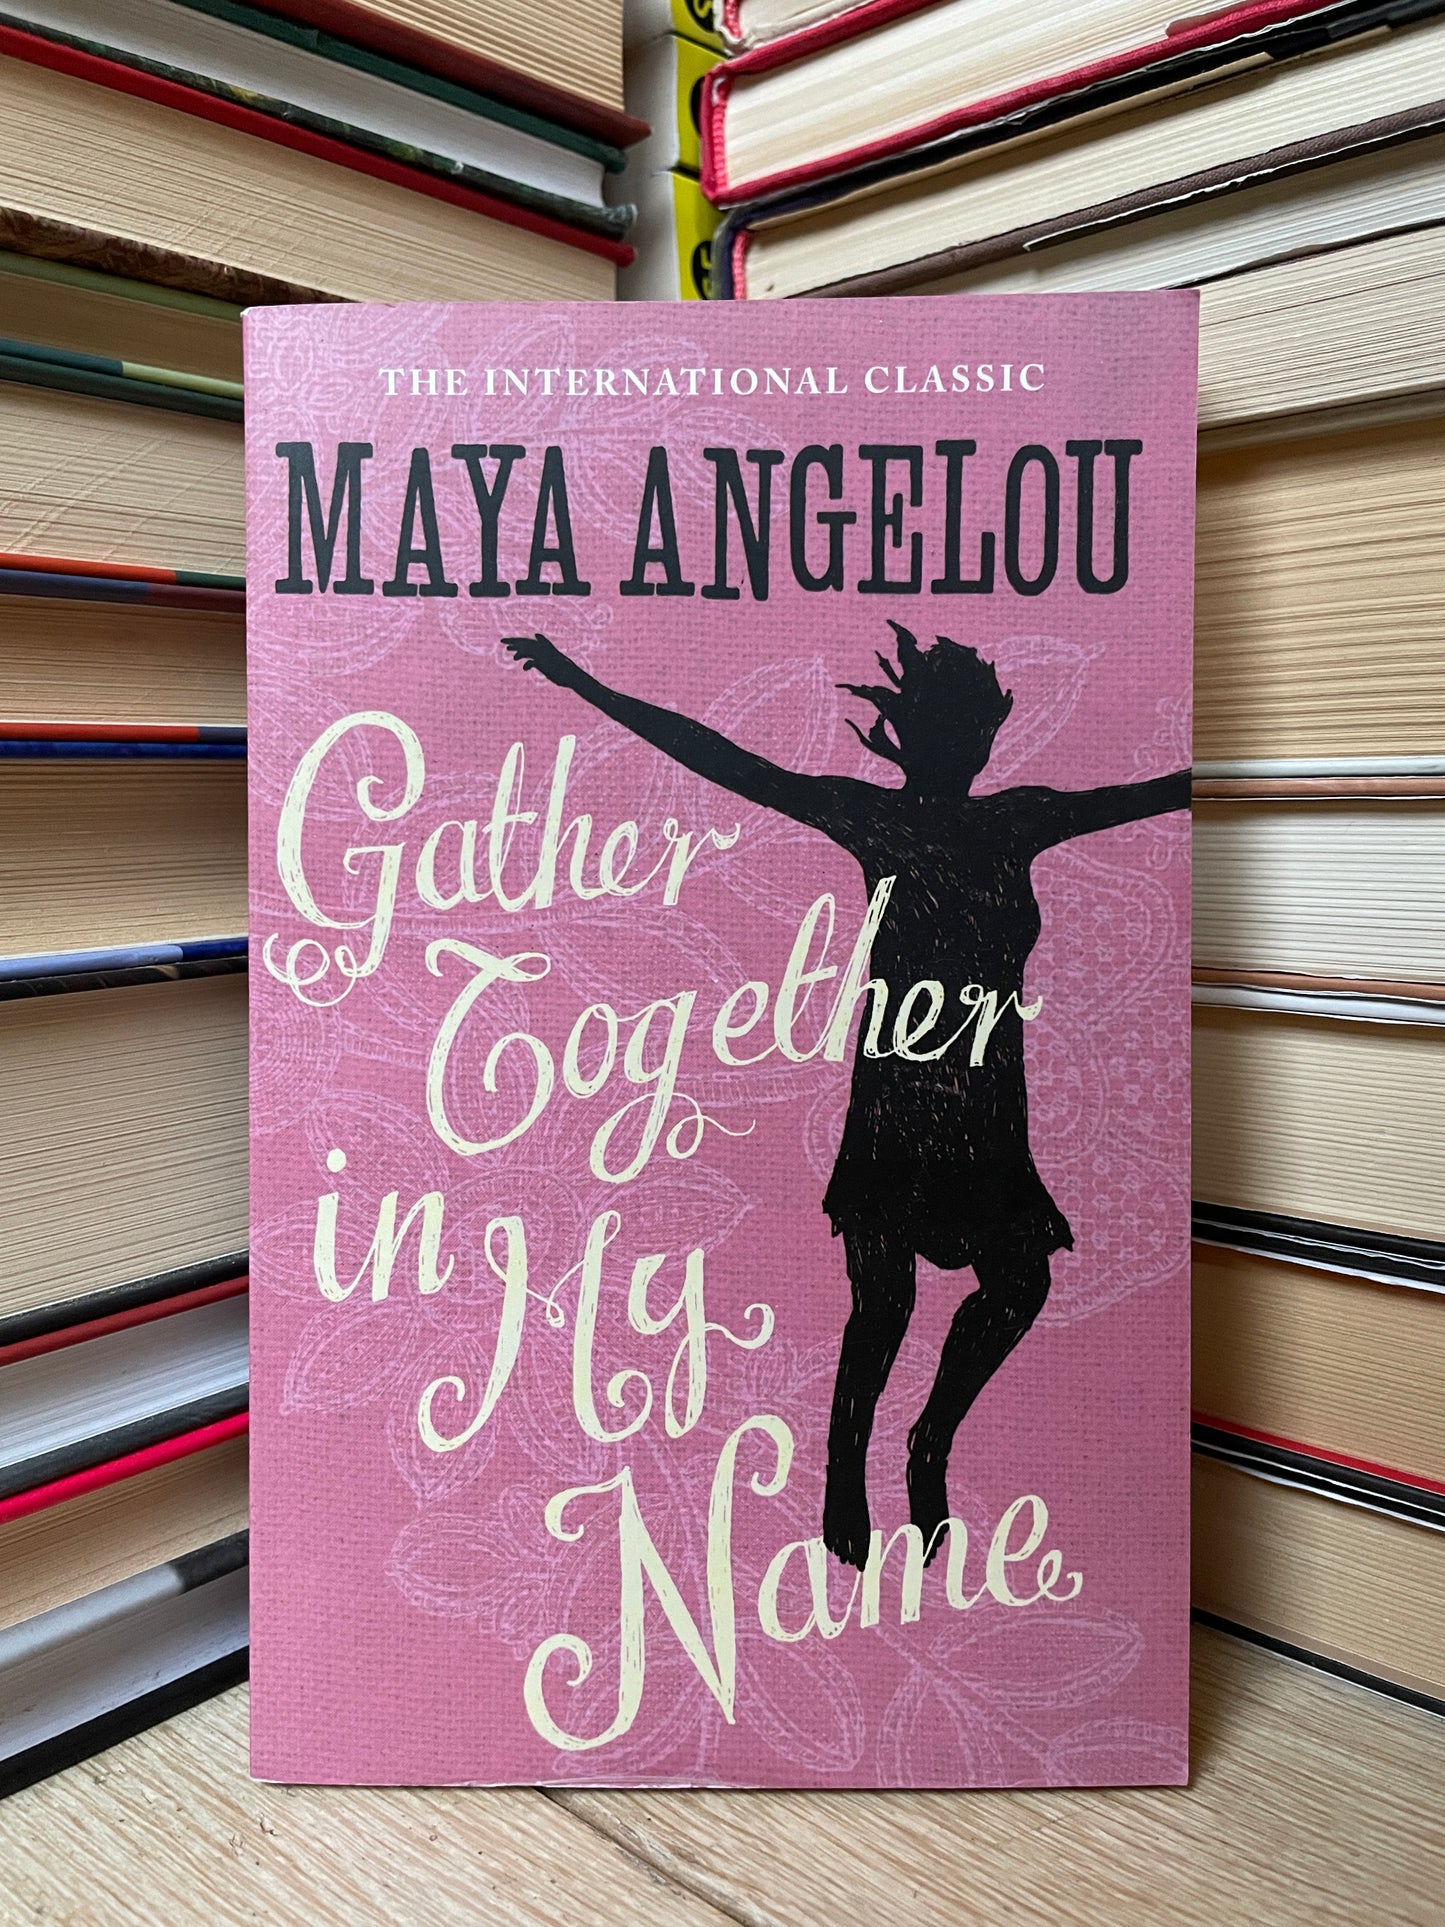 Maya Angelou - Gather Together in My Name